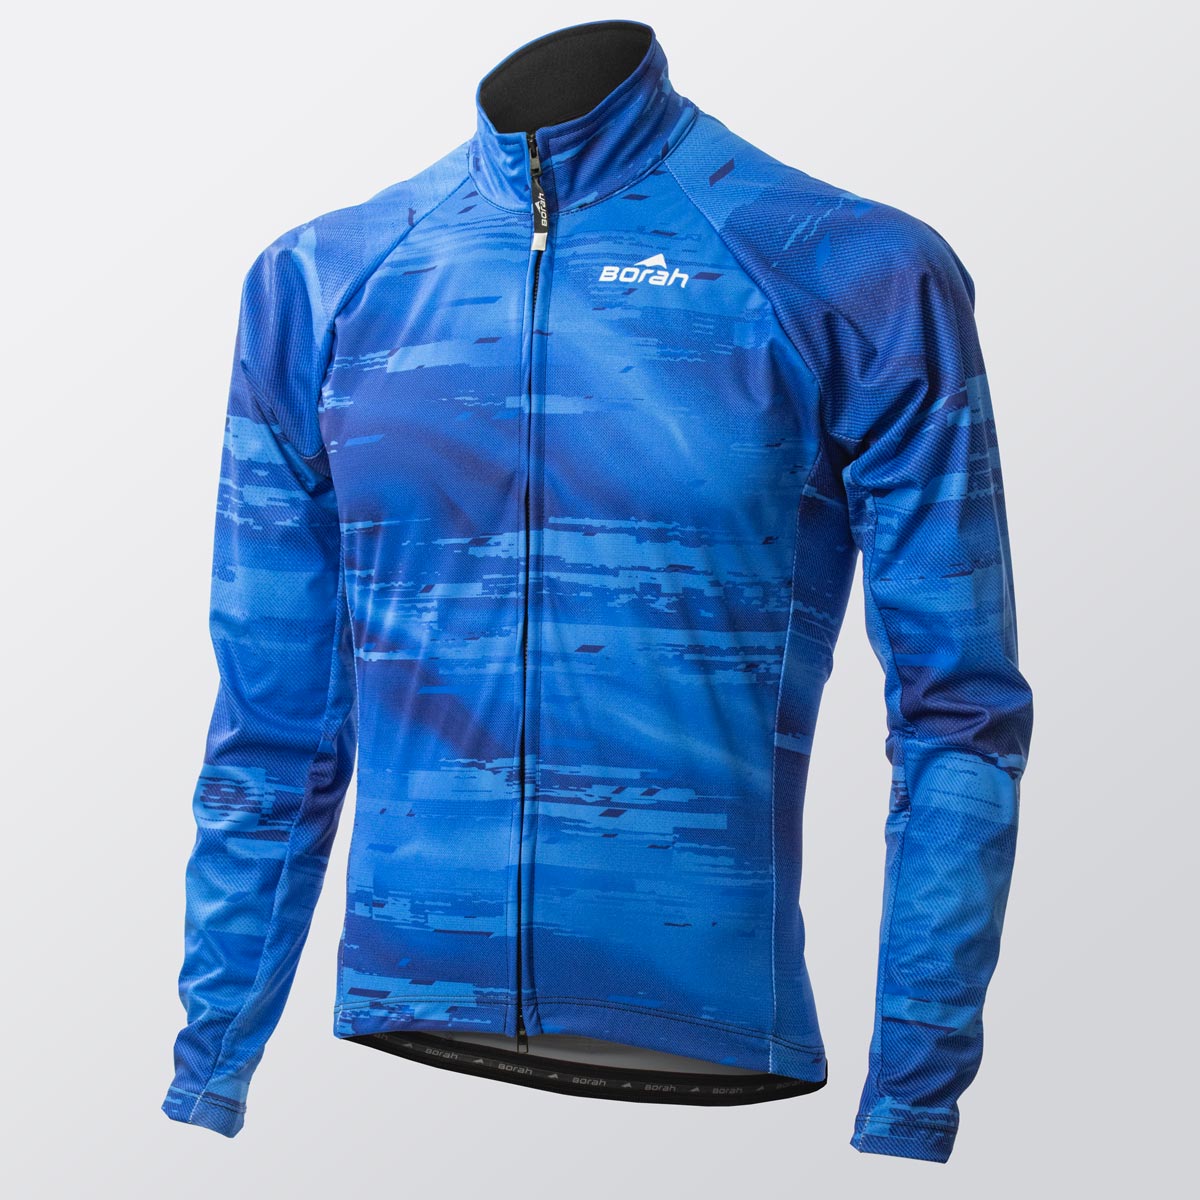 OTW Midweight Cycling Jacket front view.